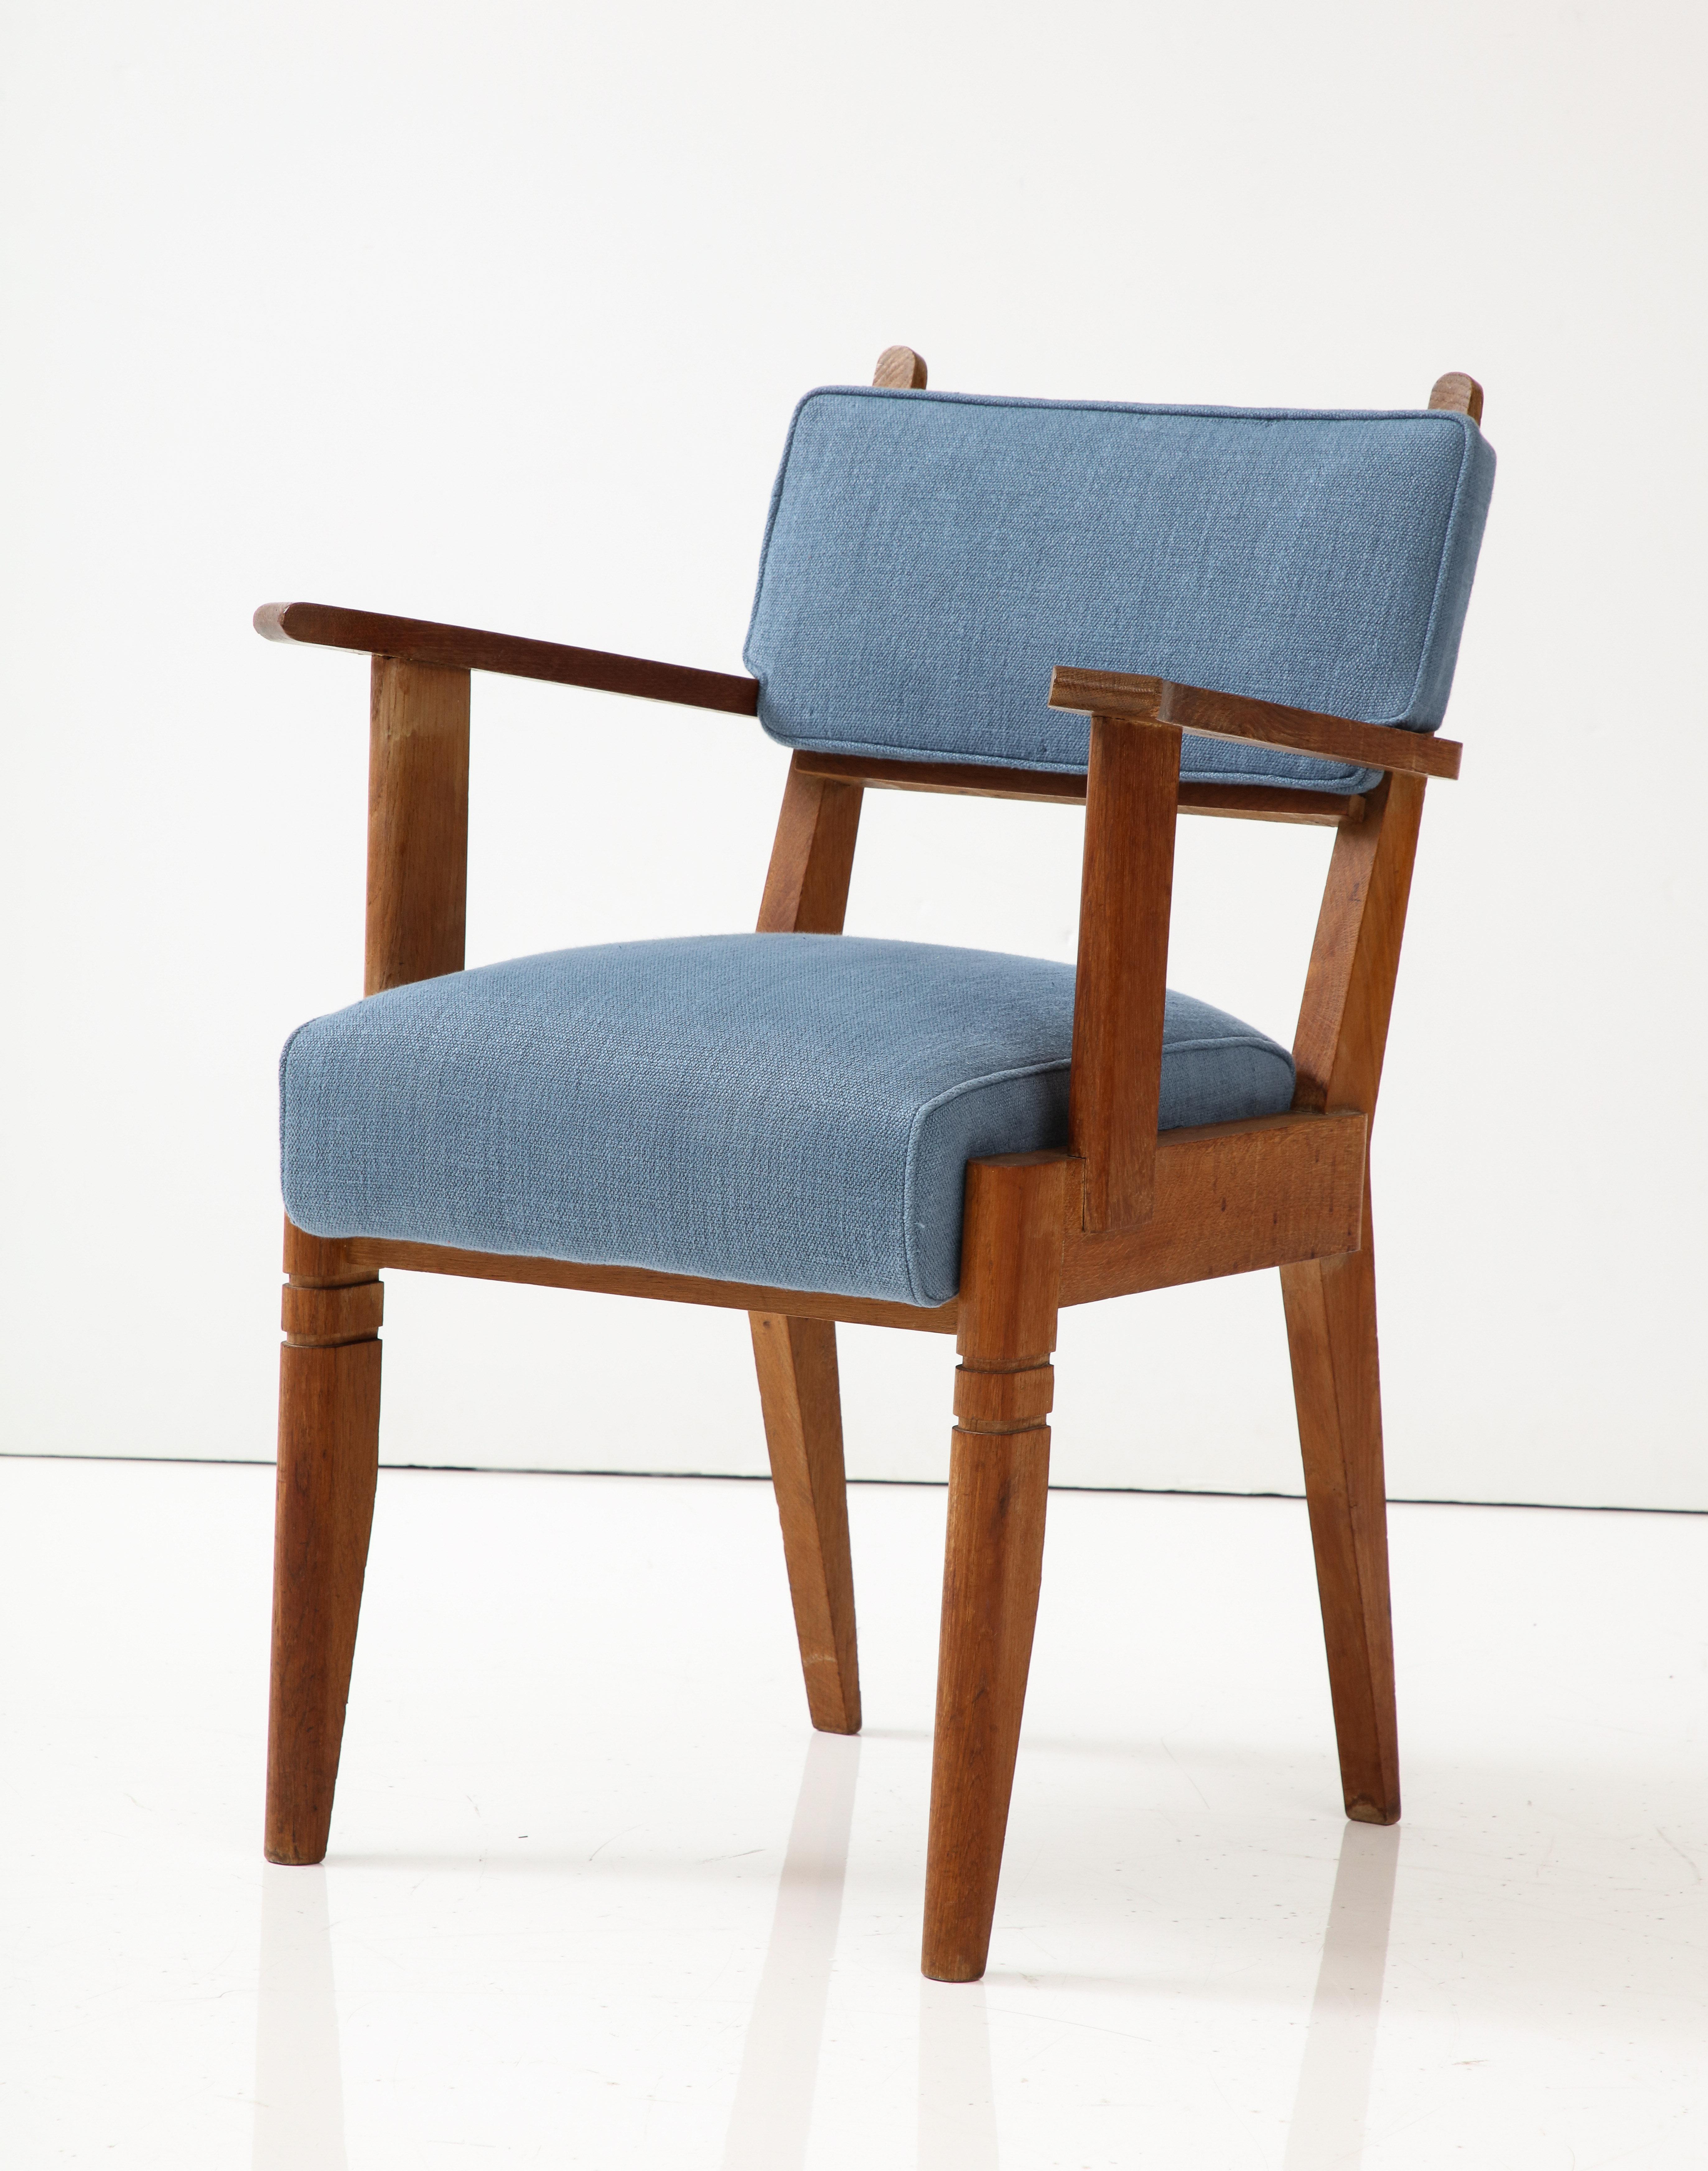 Two other chairs are available, upholstered in a rust red linen fabric.

Smart, tall chair with comfortable upholstery and elegant lines. New cushions with blue linen upholstery.